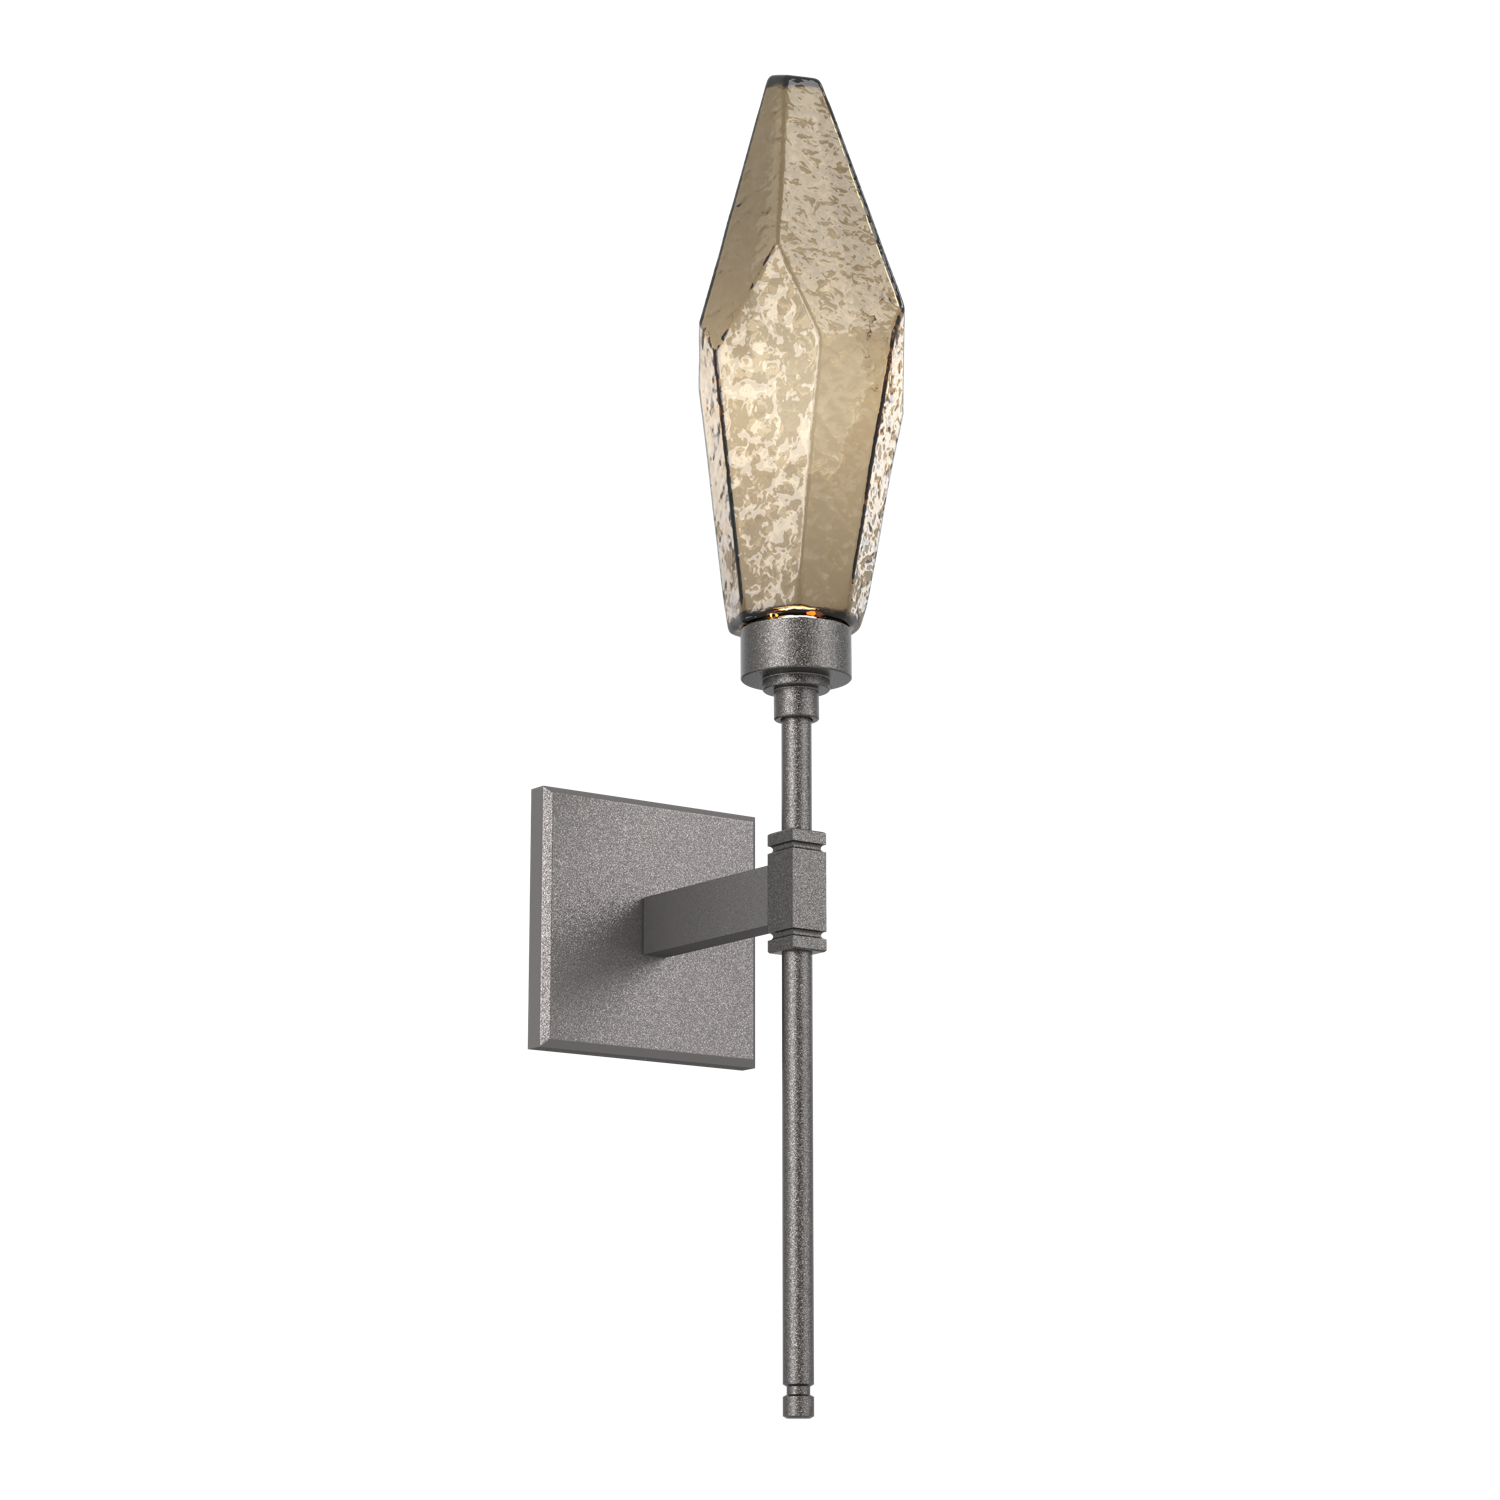 IDB0050-07-GP-CB-Hammerton-Studio-Rock-Crystal-belvedere-wall-sconce-with-graphite-finish-and-chilled-bronze-blown-glass-shades-and-LED-lamping